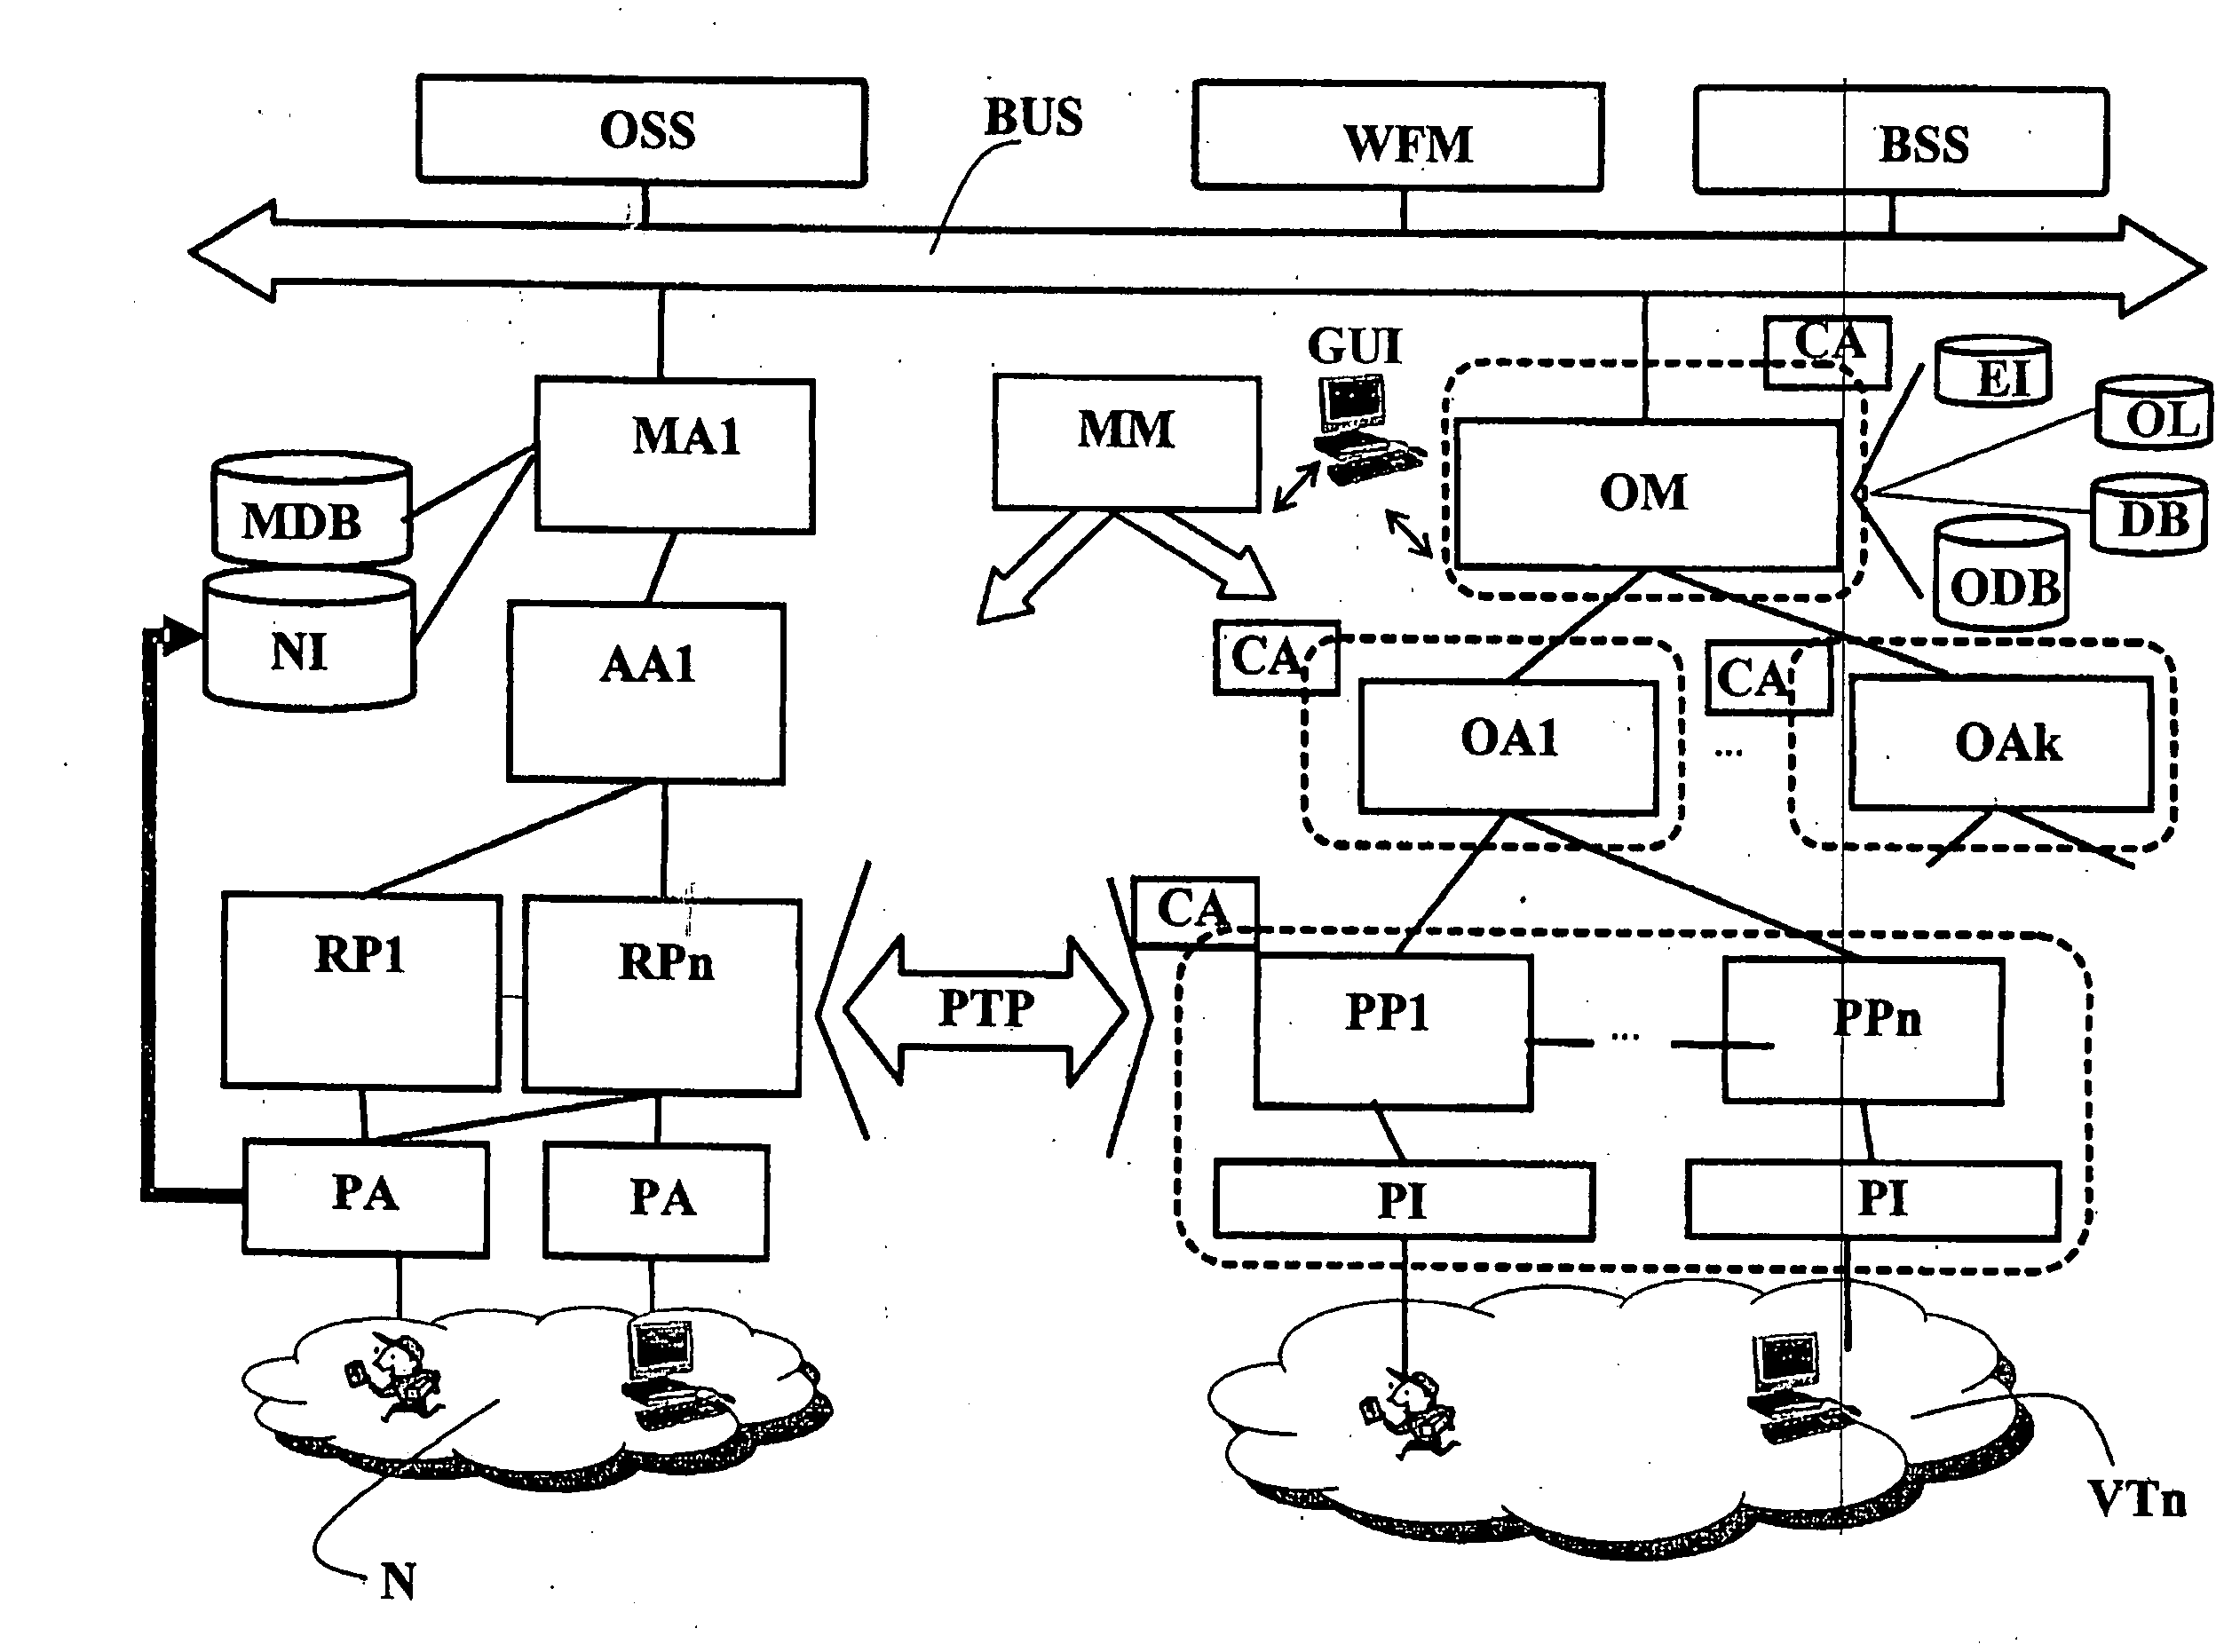 Method and system for generating instruction signals for performing interventions in a communication network, and corresponding computer-program product